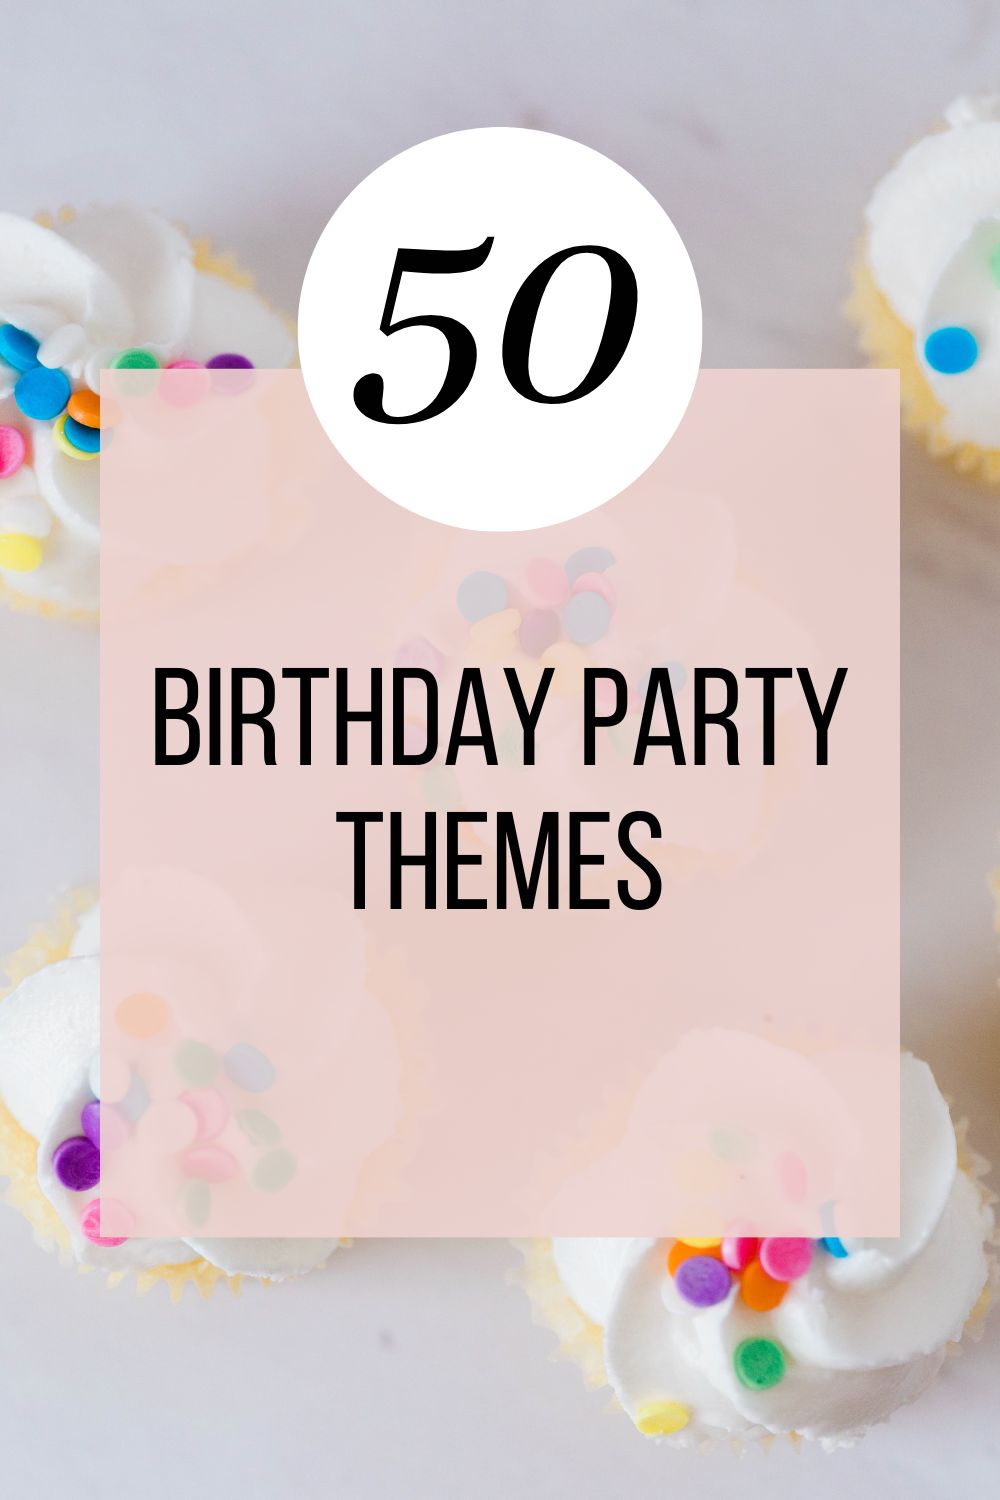 Celebrate in Style: The Ultimate Guide to 50 Birthday Party Themes